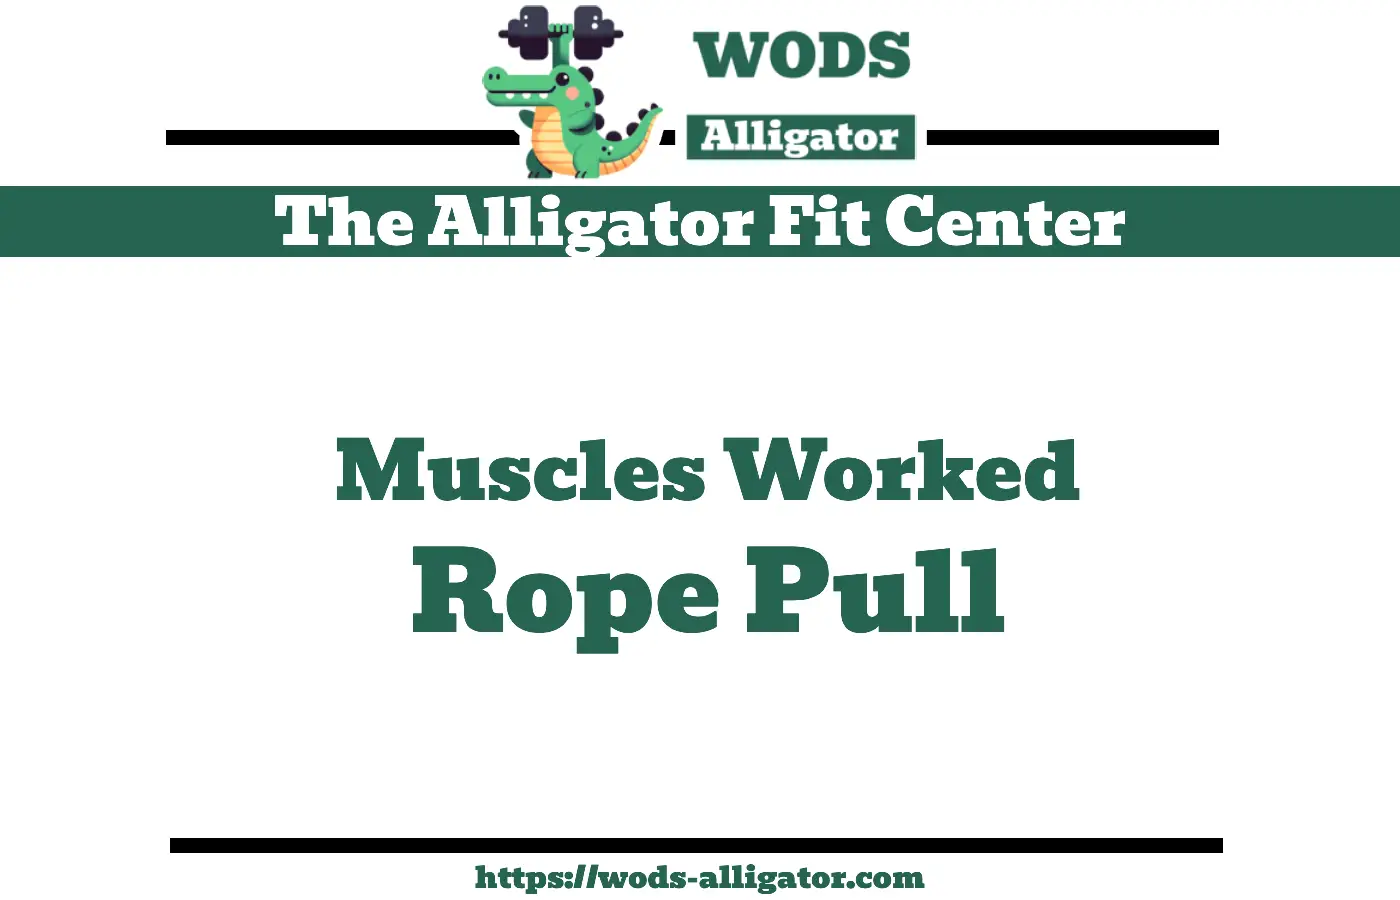 Discover the Rope Pull Muscles Worked in Your Workout Routine